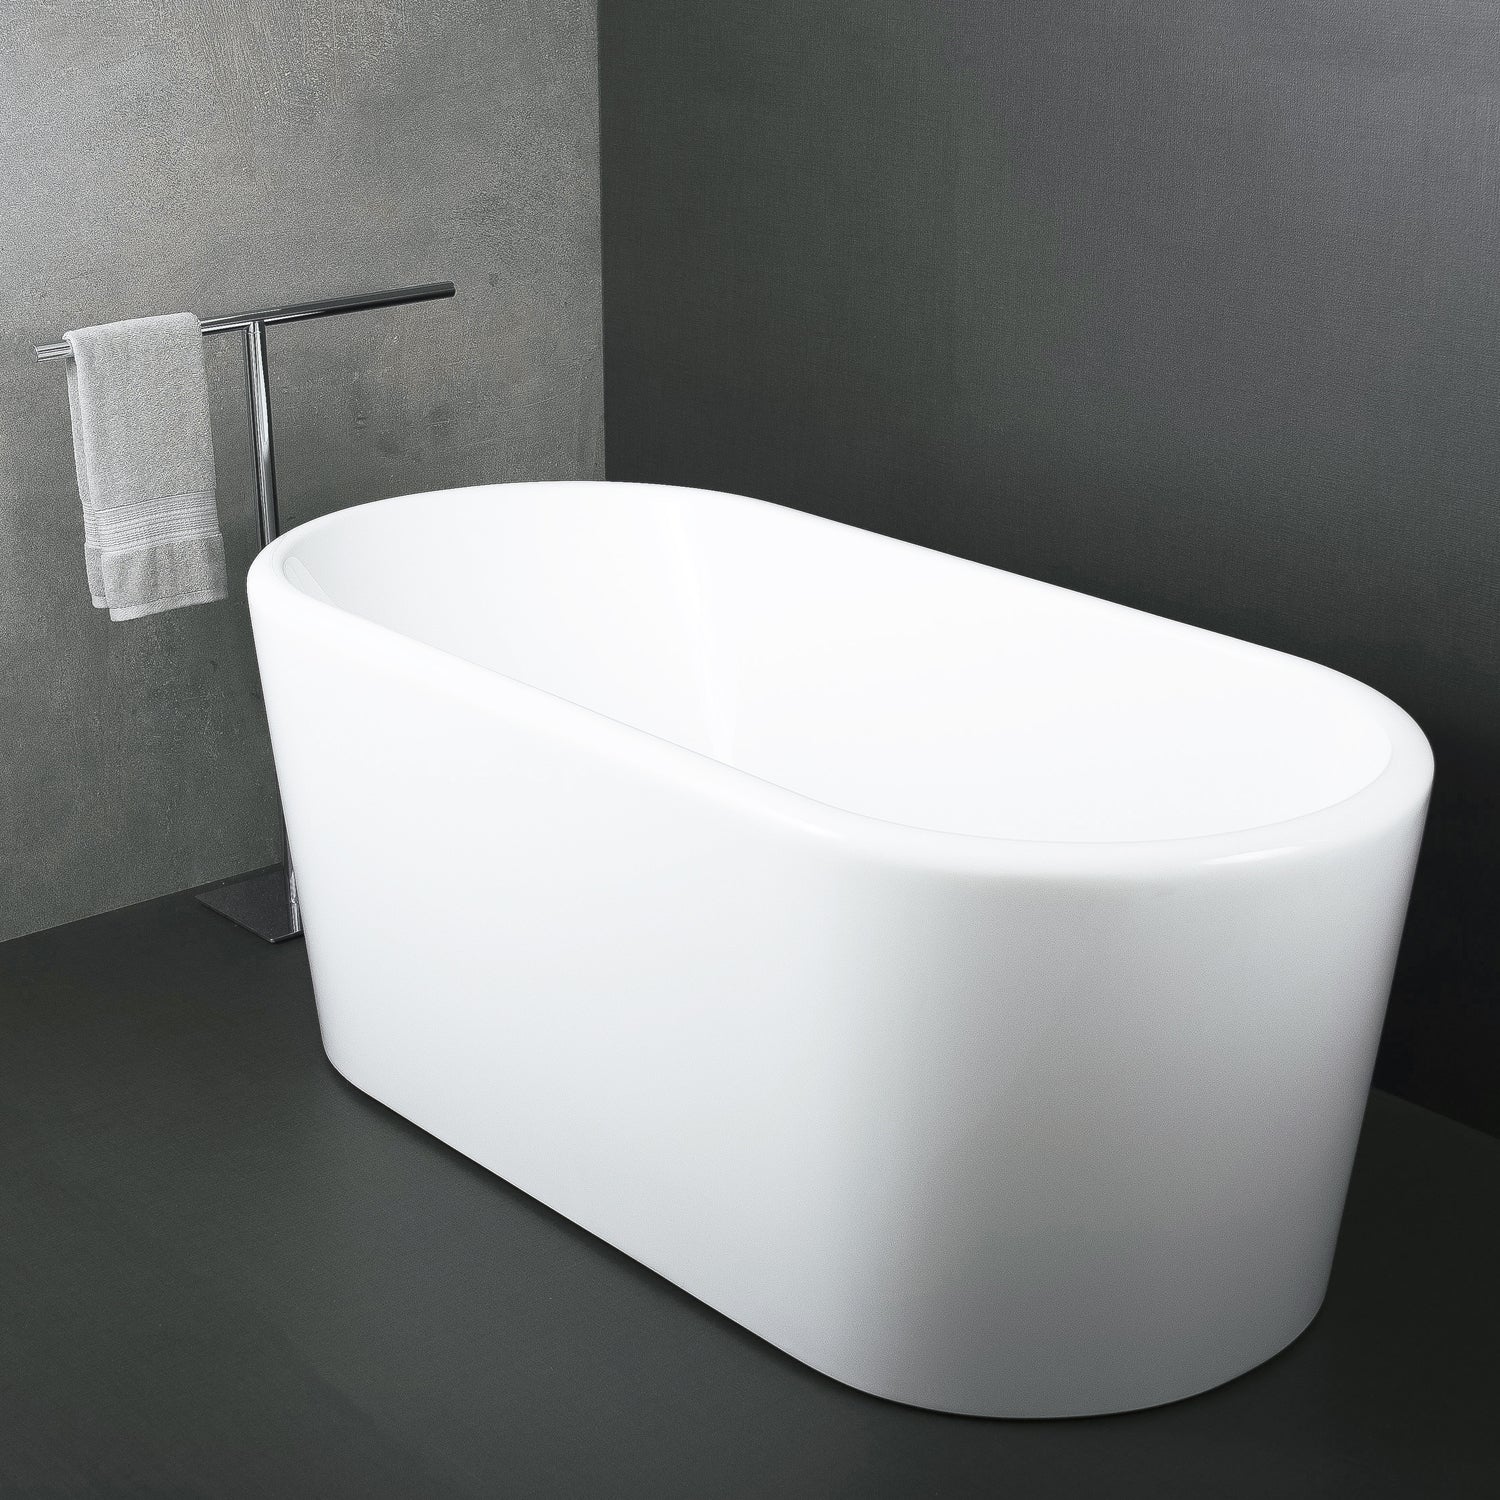 DAX Oval Freestanding High Gloss Acrylic Bathtub with Central Drain and Overflow, Stainless Steel Frame, 59-1/16 x 22-13/16 x 27-9/16 Inches (BT-8062)